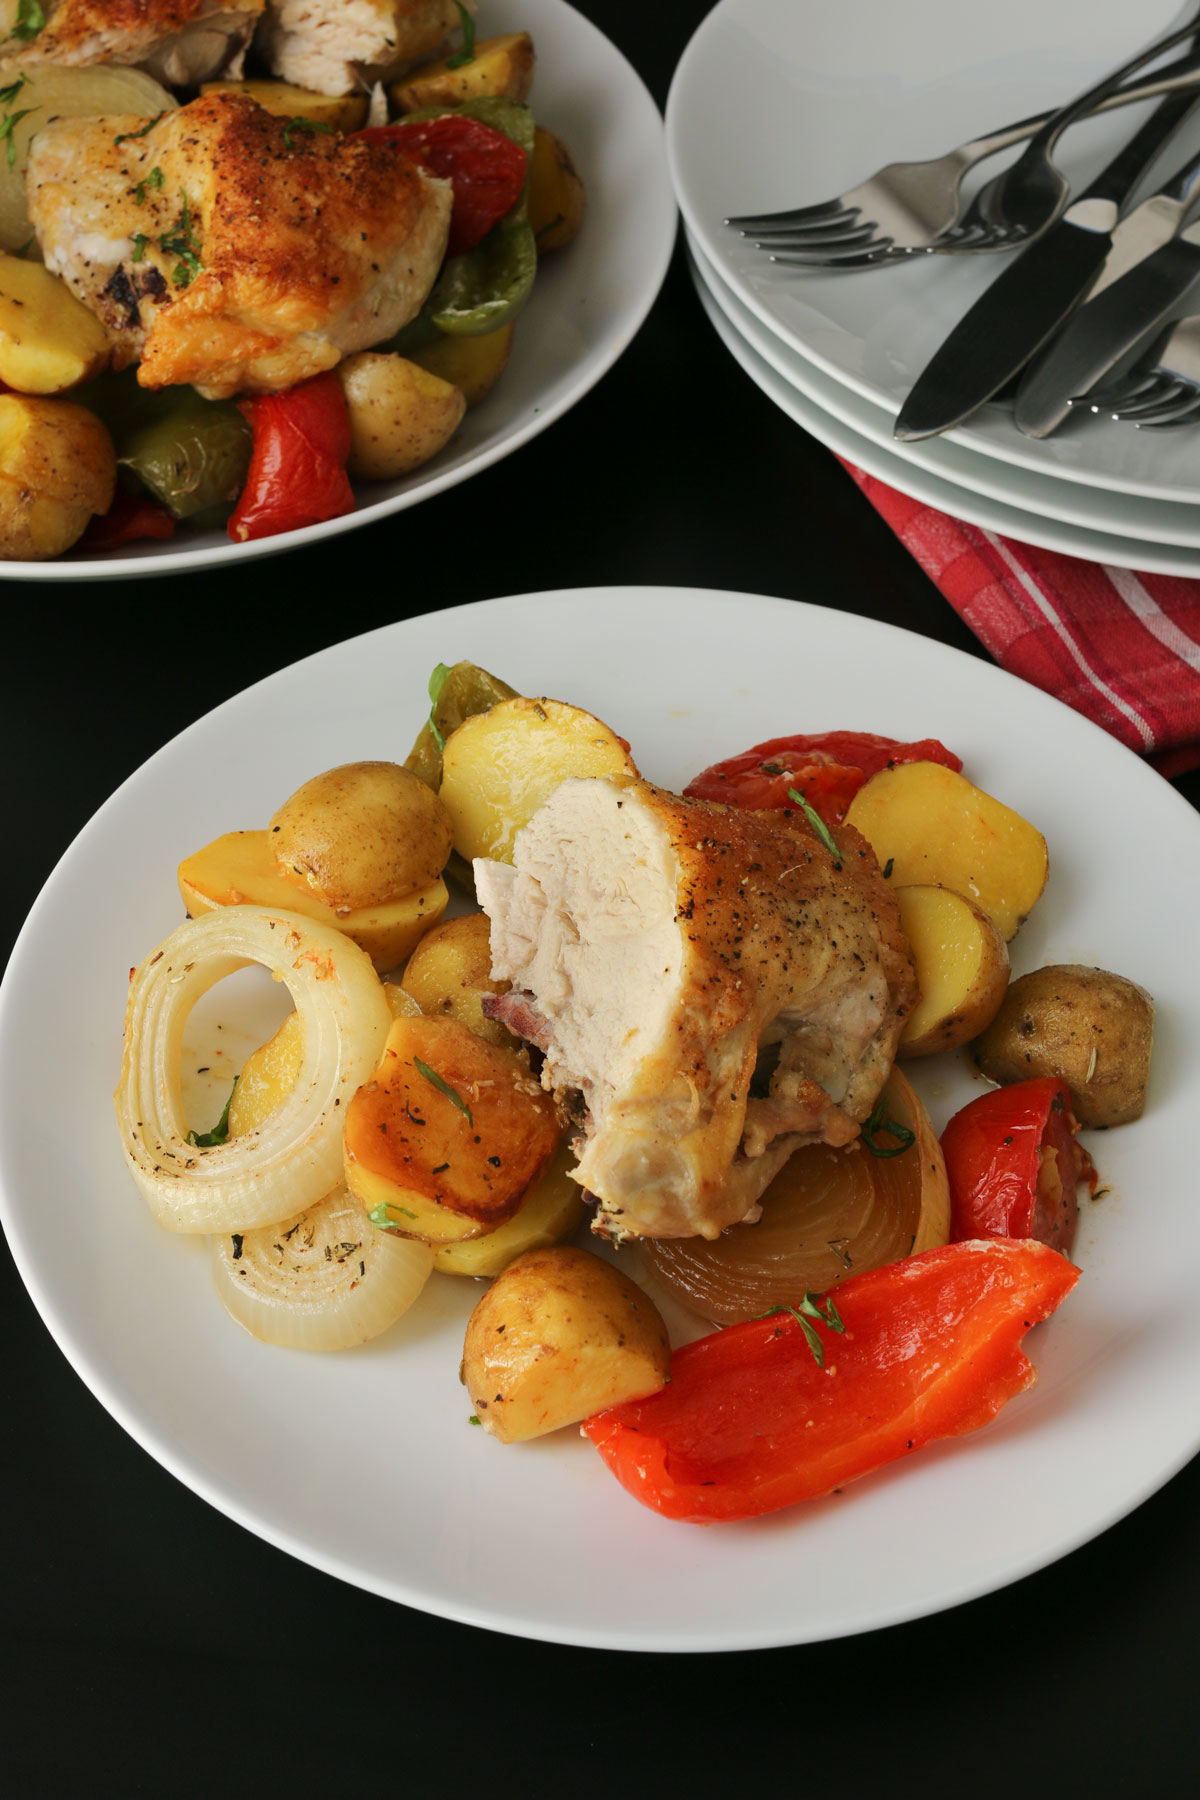 dinner plate with baked chicken atop a bed of peppers, onions, and potatoes on a dinner table set with a serving platter and additional plates and flatware.